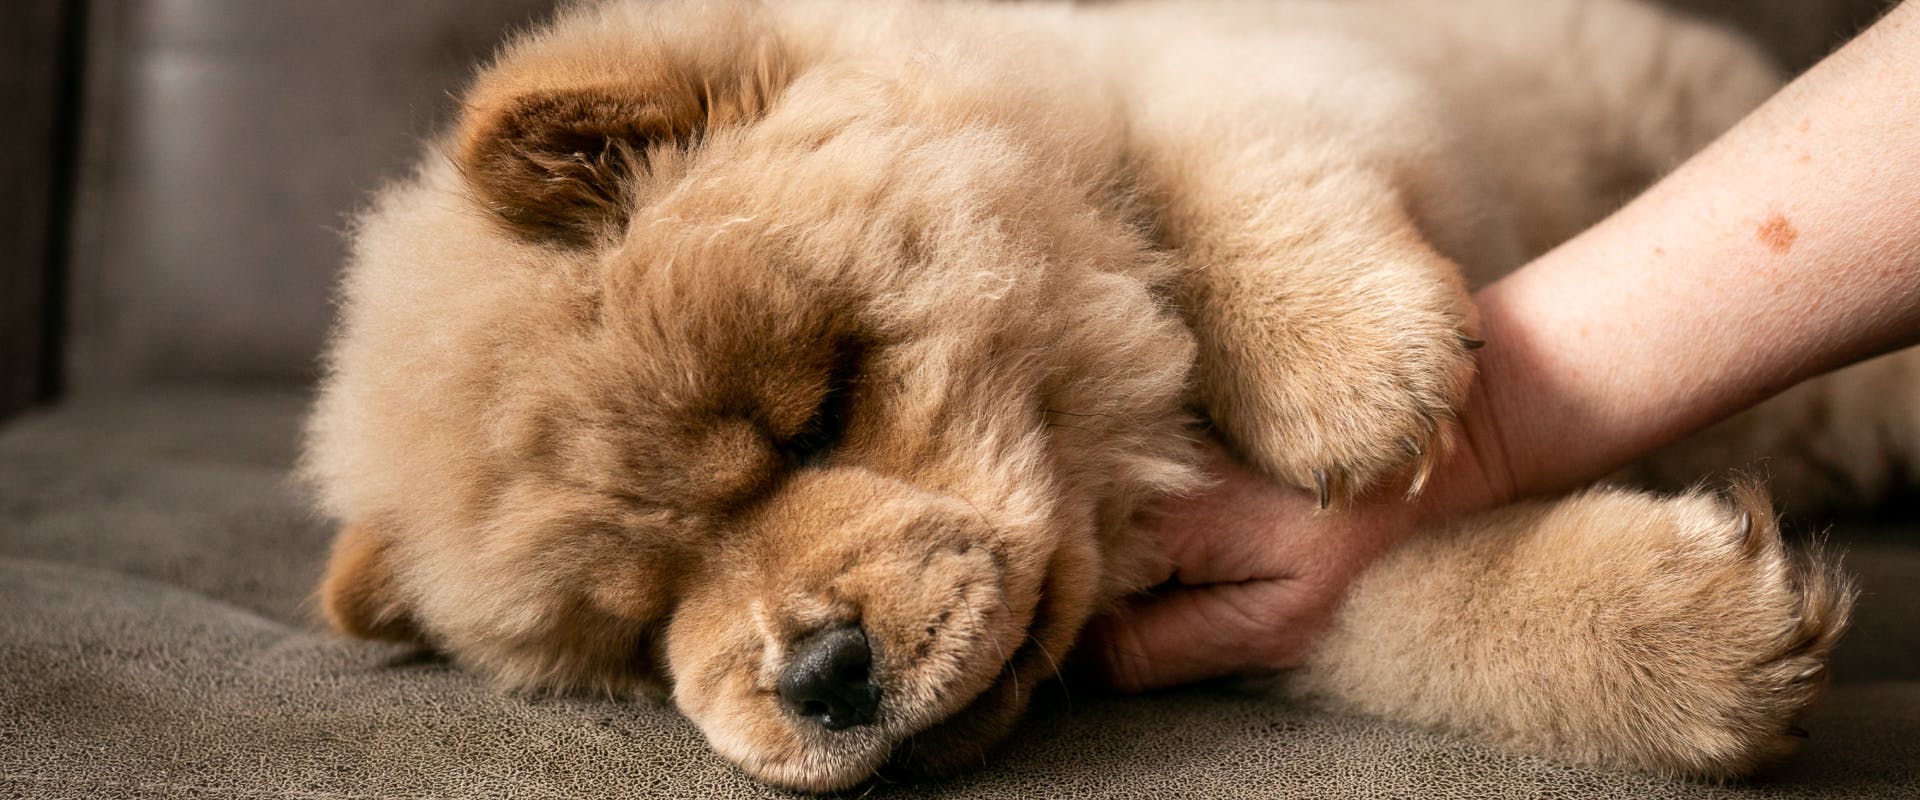 a chow chow puppy sleeping on its side on a brown coach while a human strokes their chest